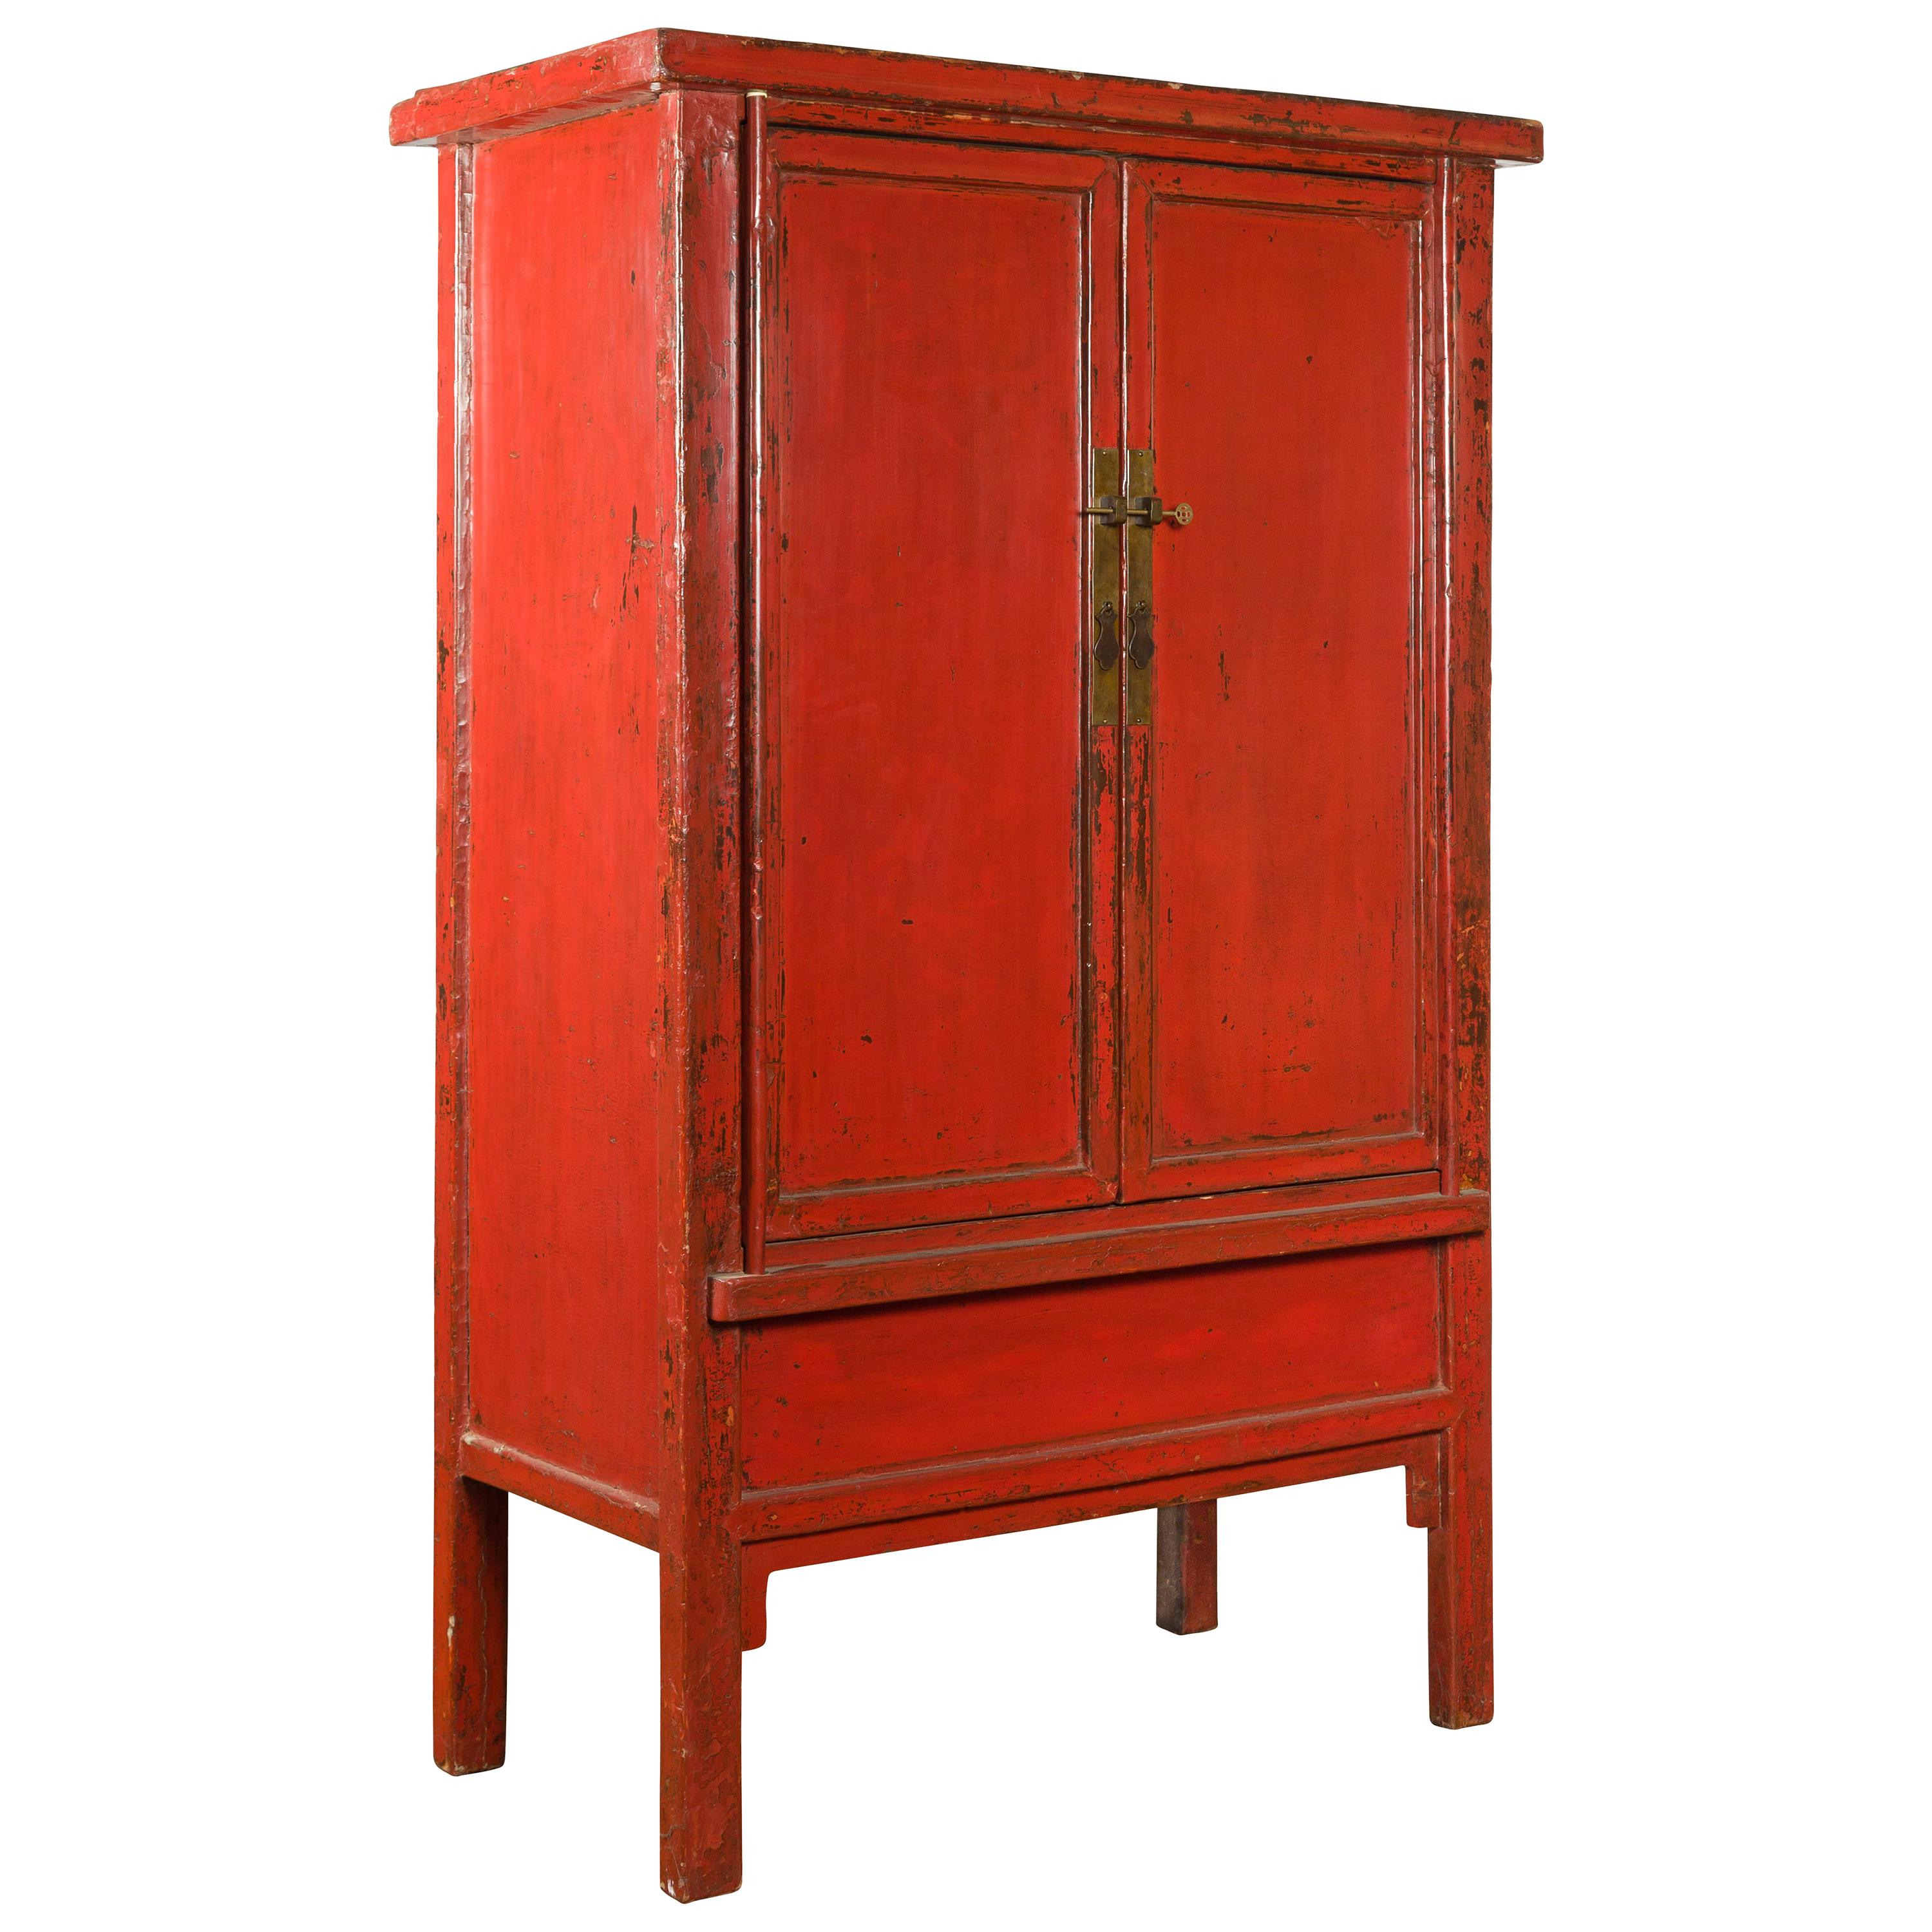 Chinese Qing Dynasty 19th Century Cabinet from Shanxi with Original Red Lacquer